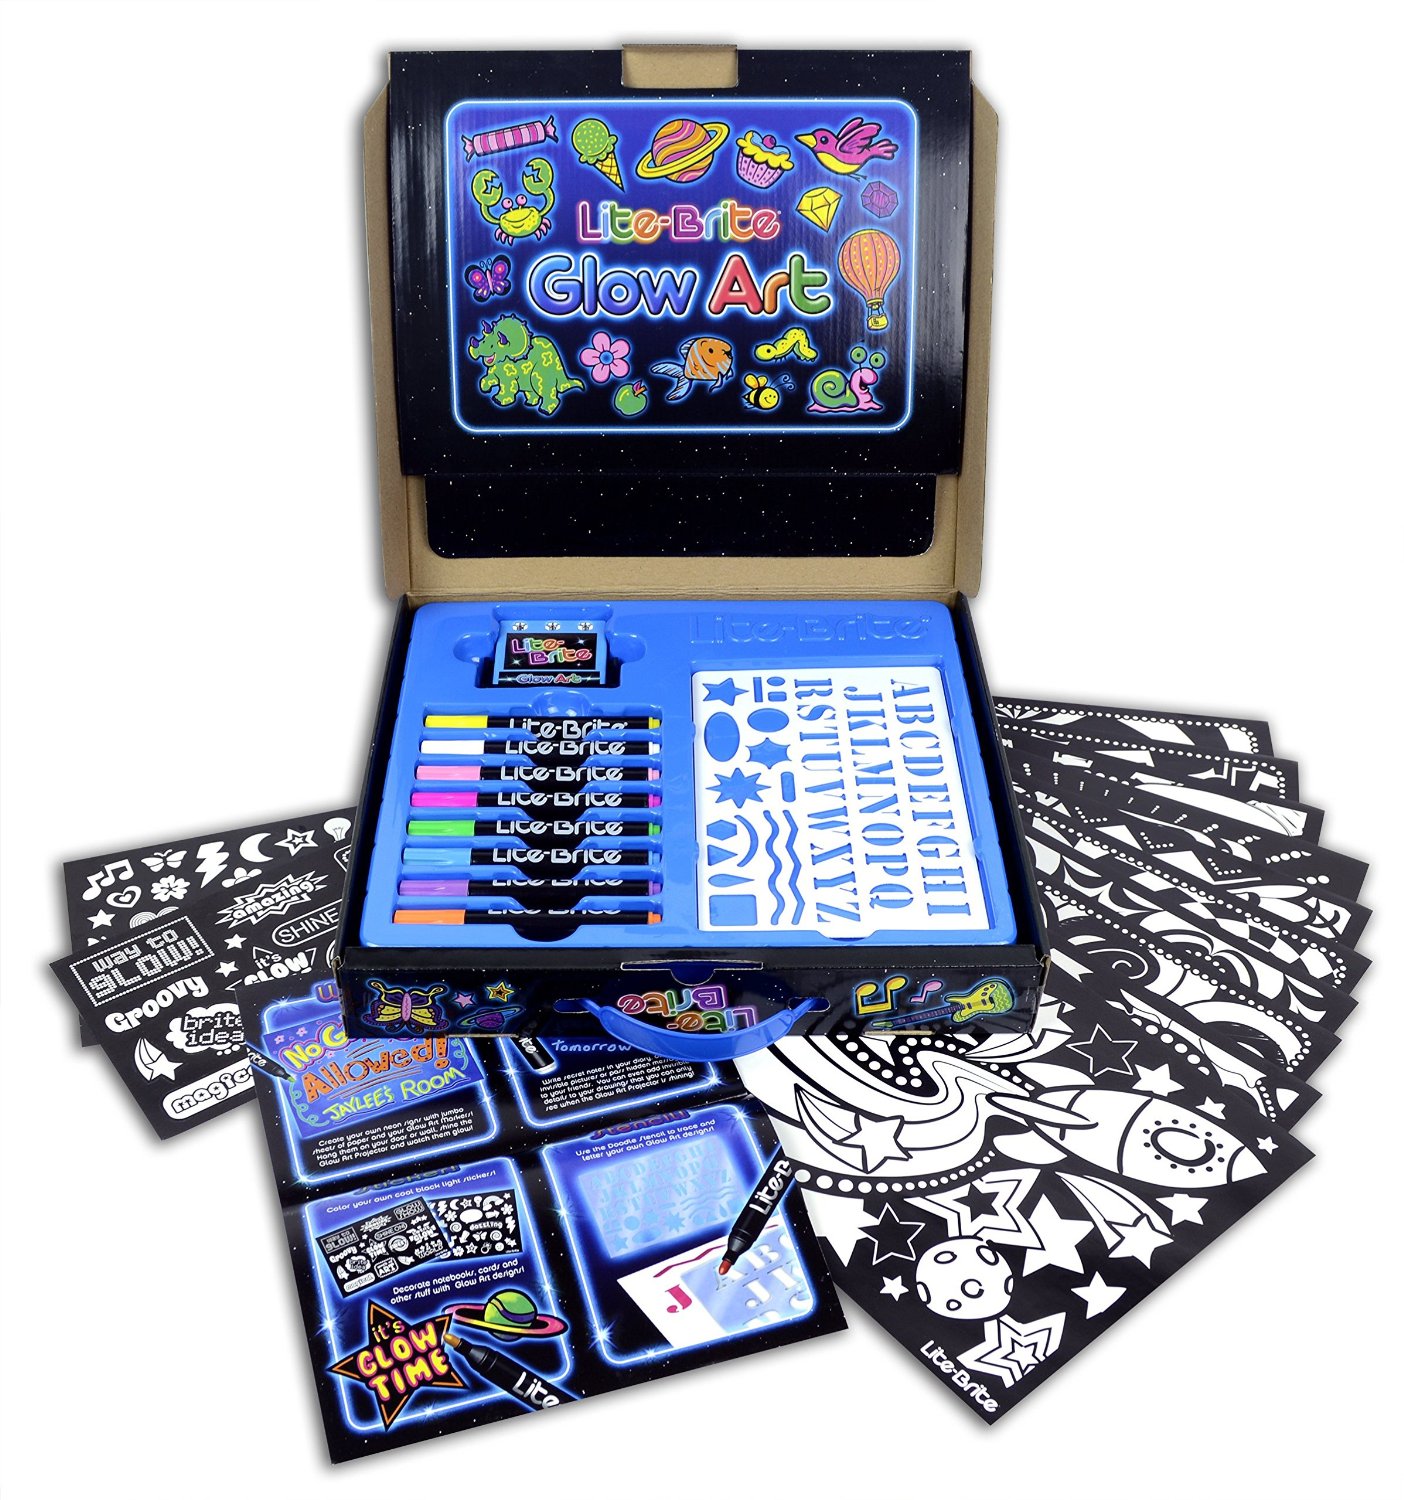 Crayola All-in-One Portable Art Studio for $9.99 (reg. $14.99)